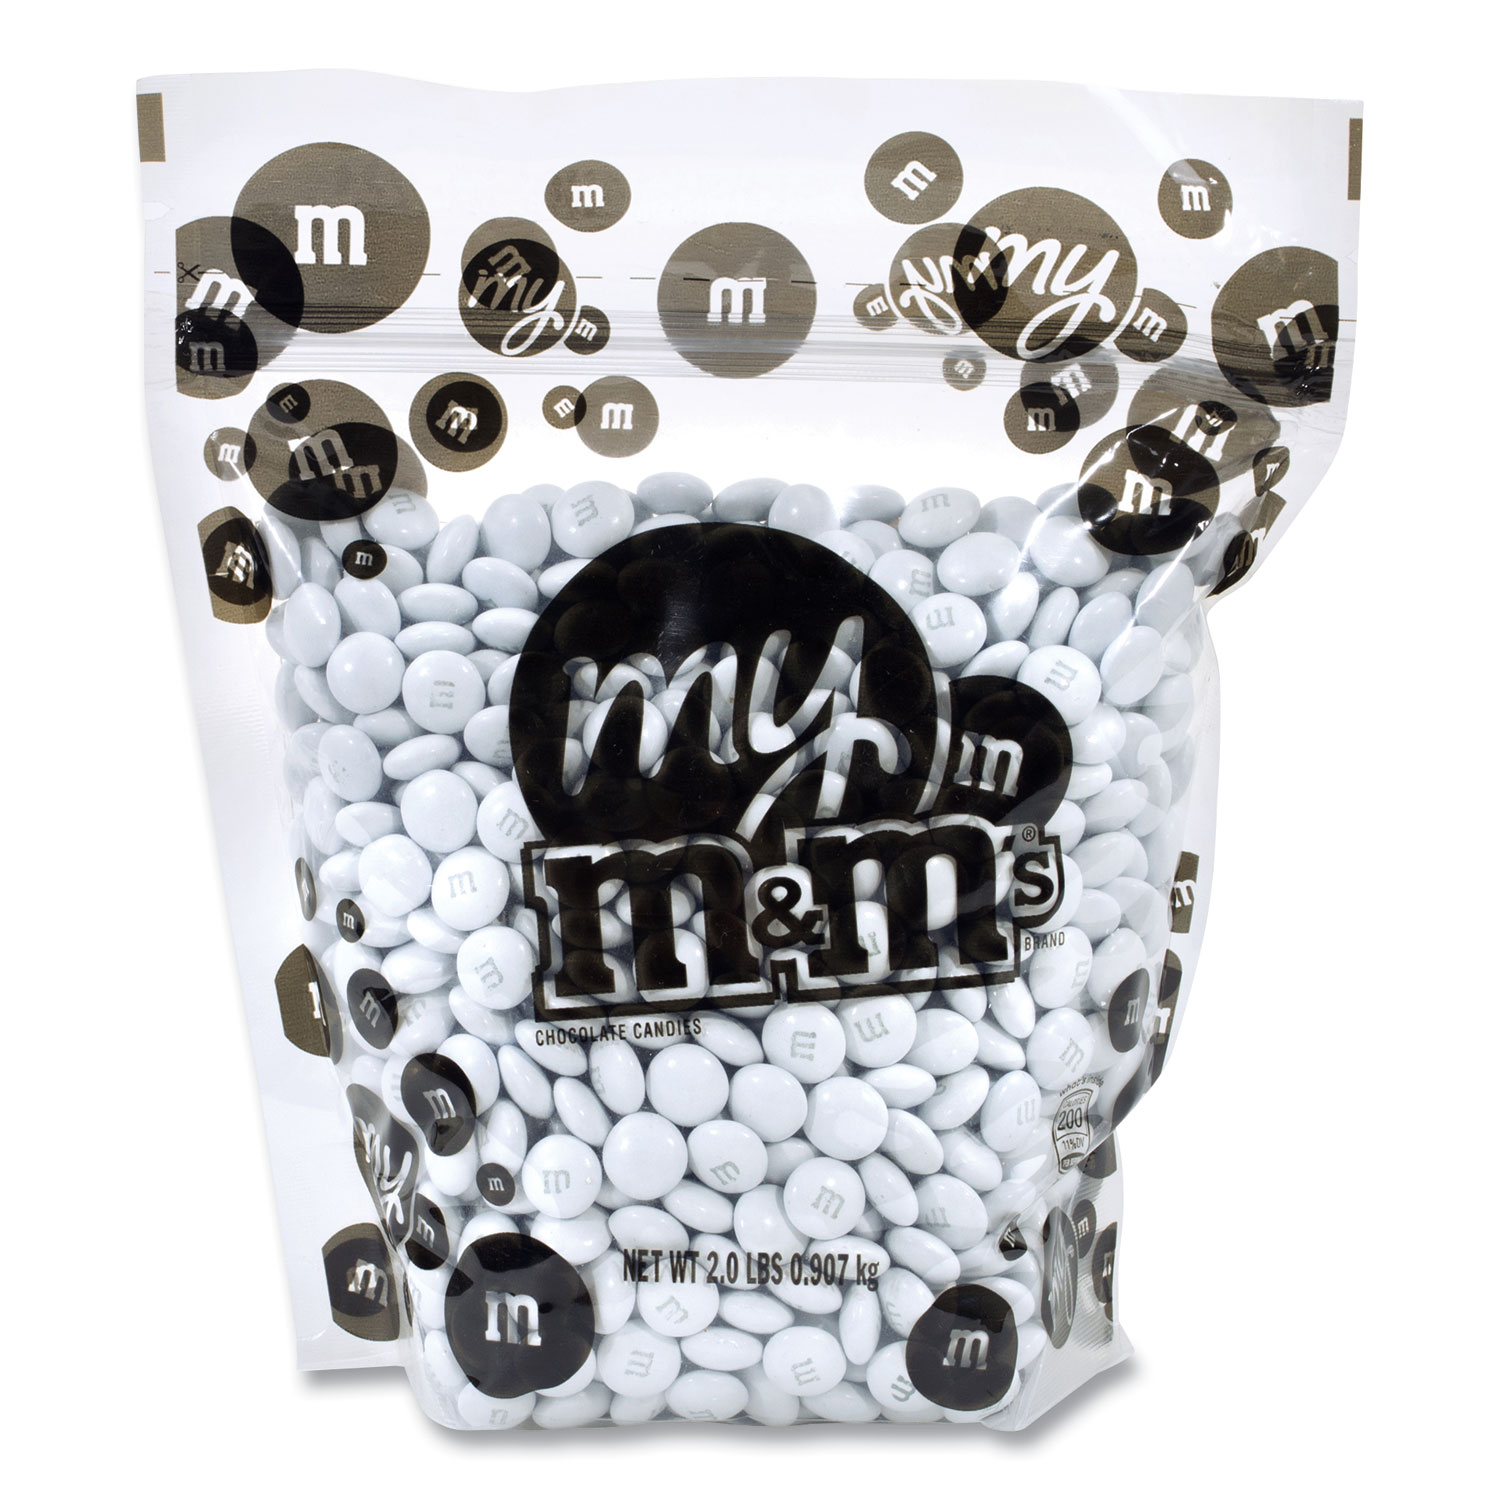  M & M's D01072 My M and M's Bulk Candies, 2 lb Bag, Dark Blue, Free Delivery in 1-4 Business Days (GRR22500014) 